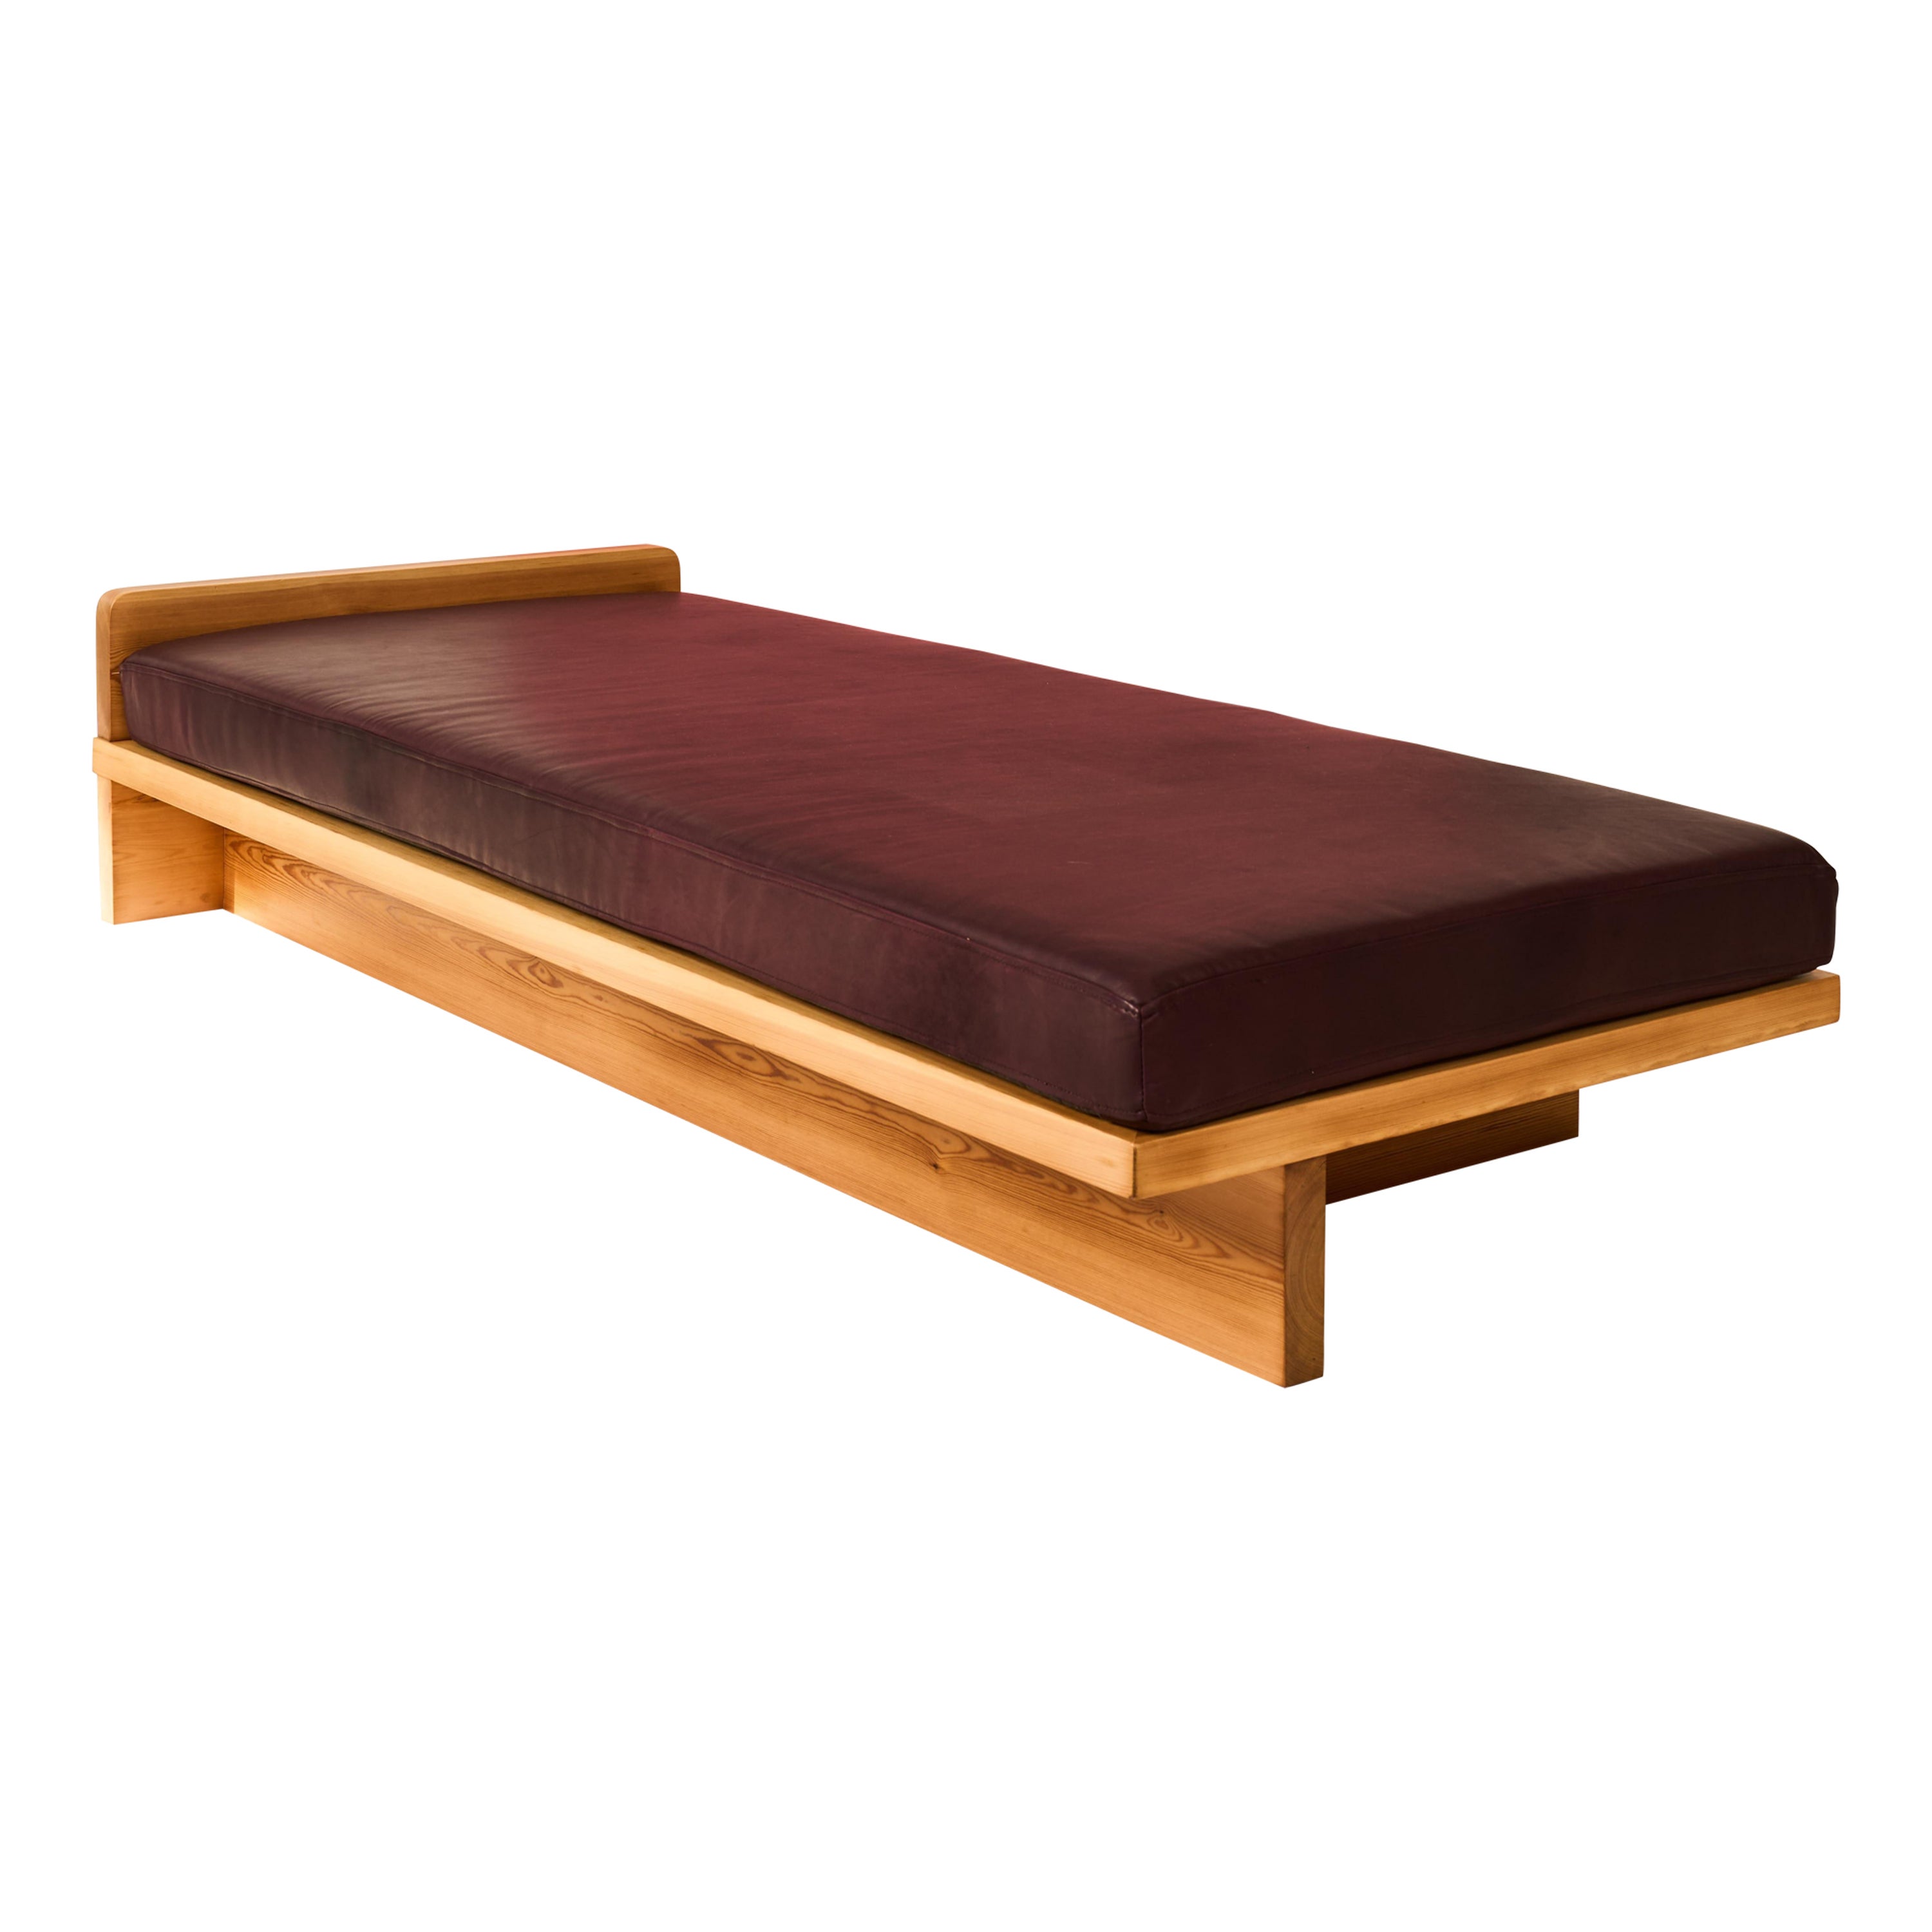 CHRISTOPHE GEVERS - Daybed For Sale